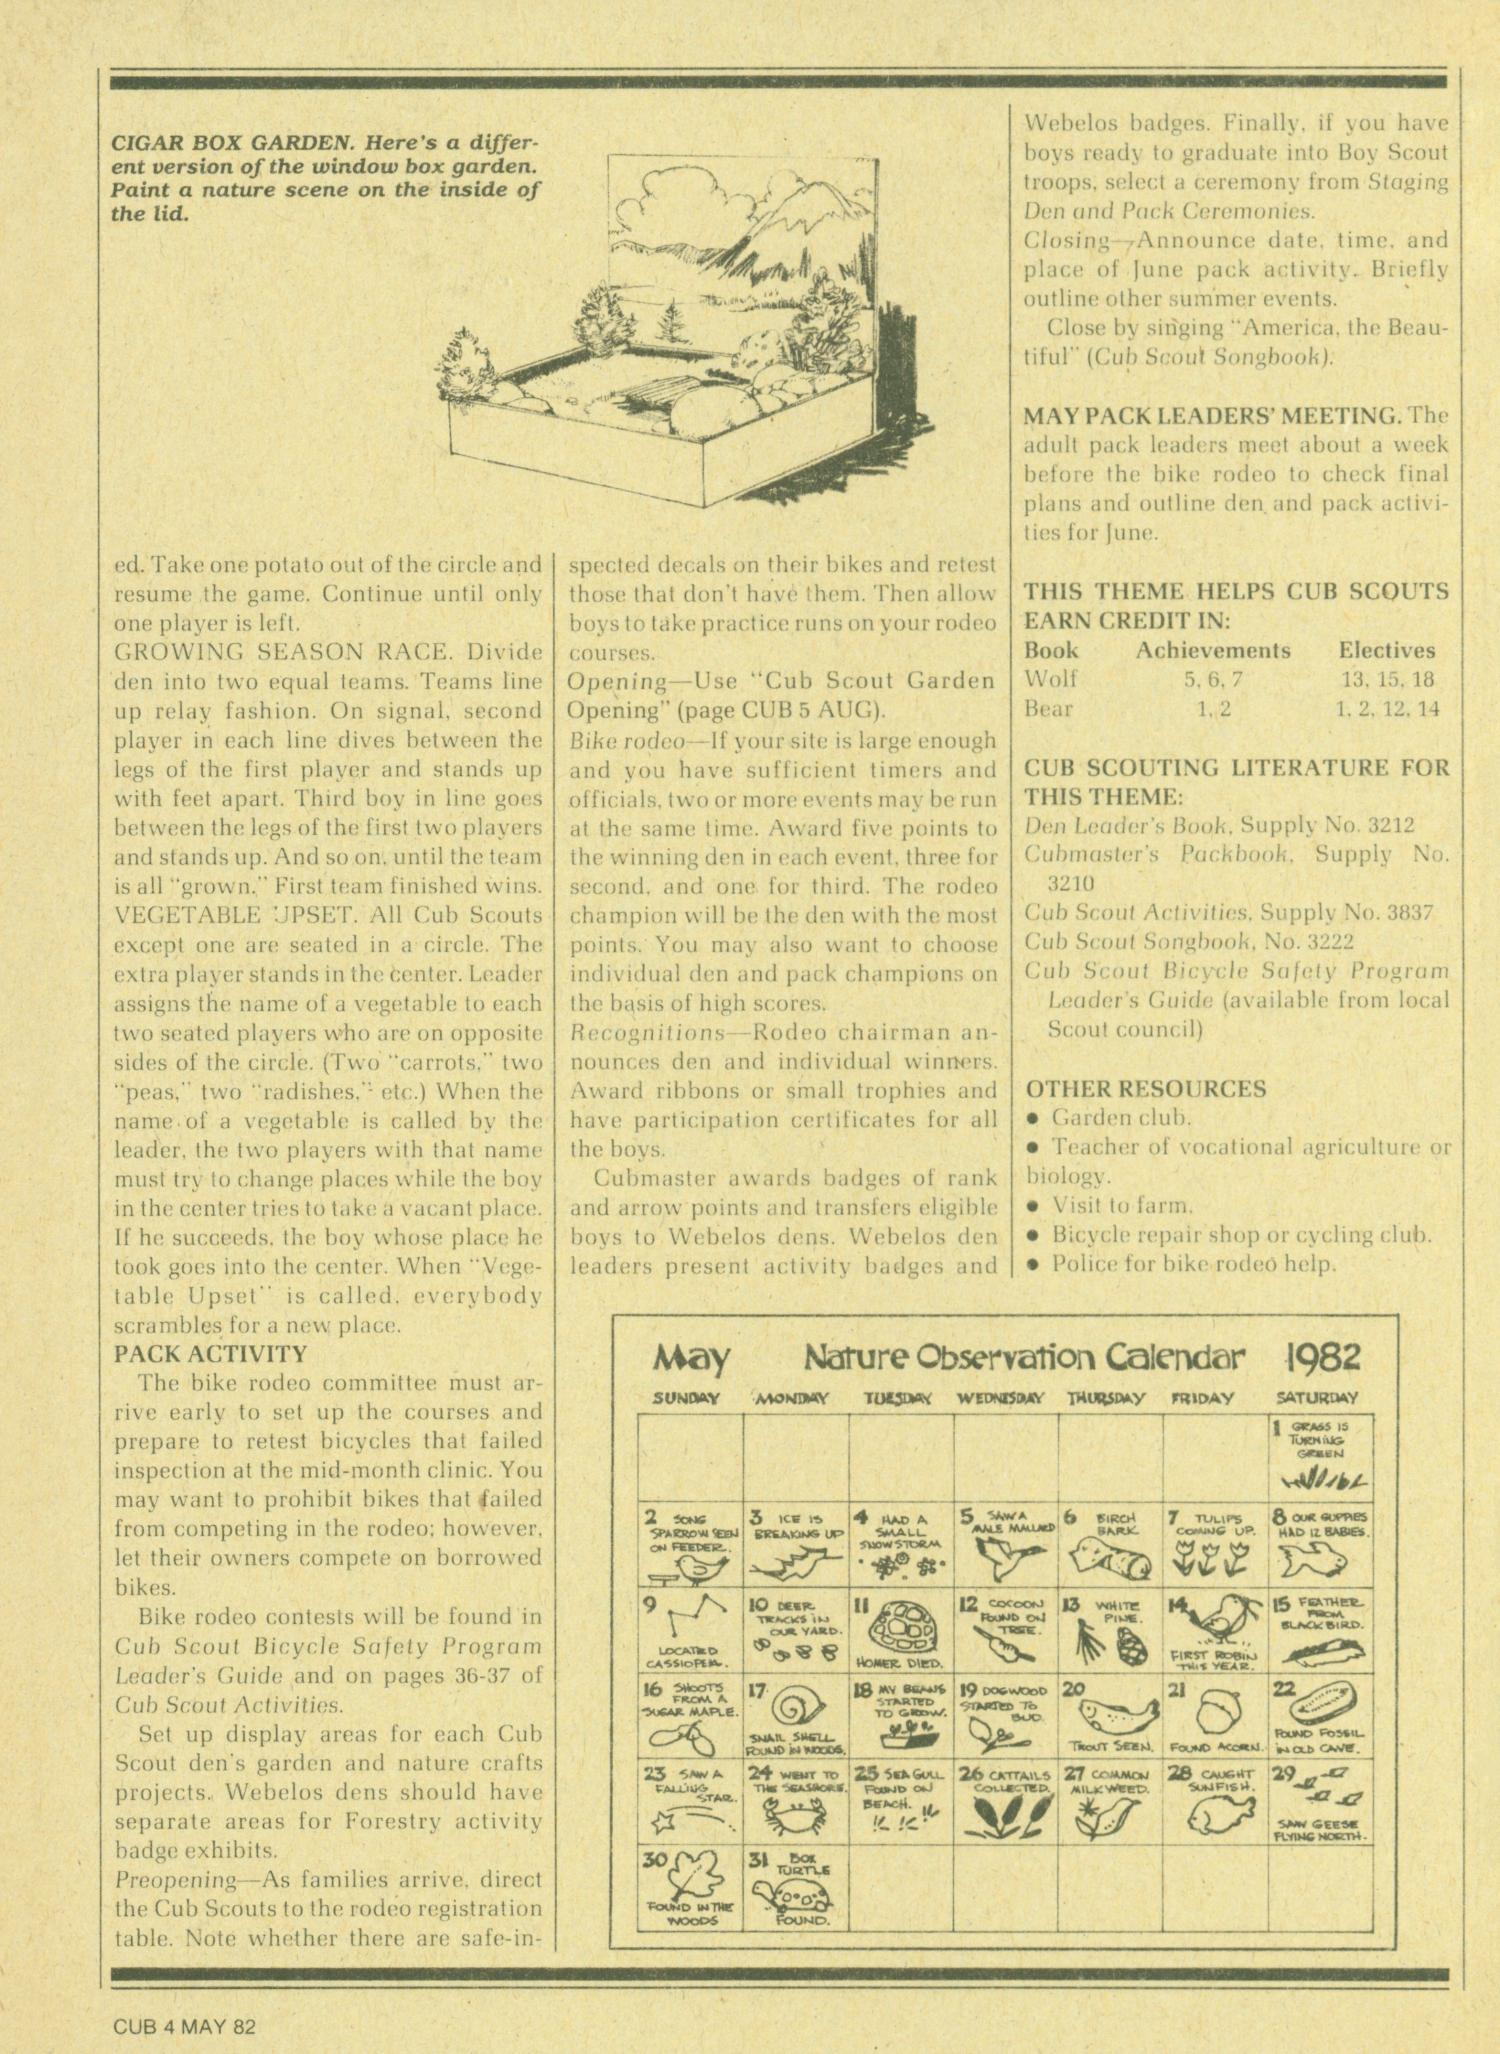 Scouting, Volume 70, Number 2, March-April 1982
                                                
                                                    4
                                                